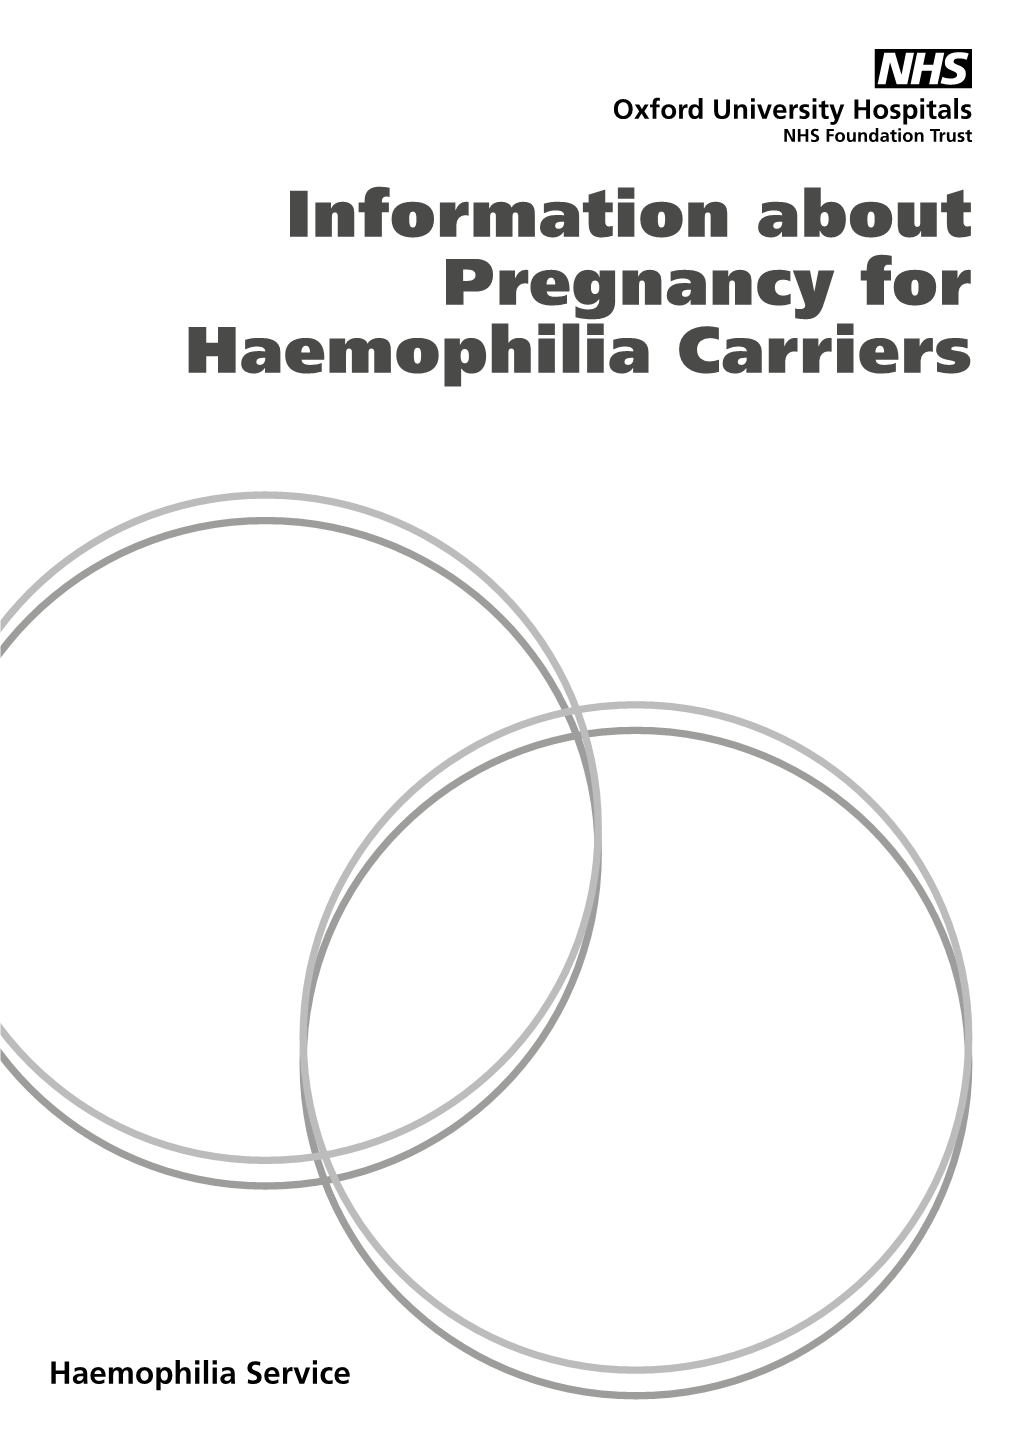 Information About Pregnancy for Haemophilia Carriers